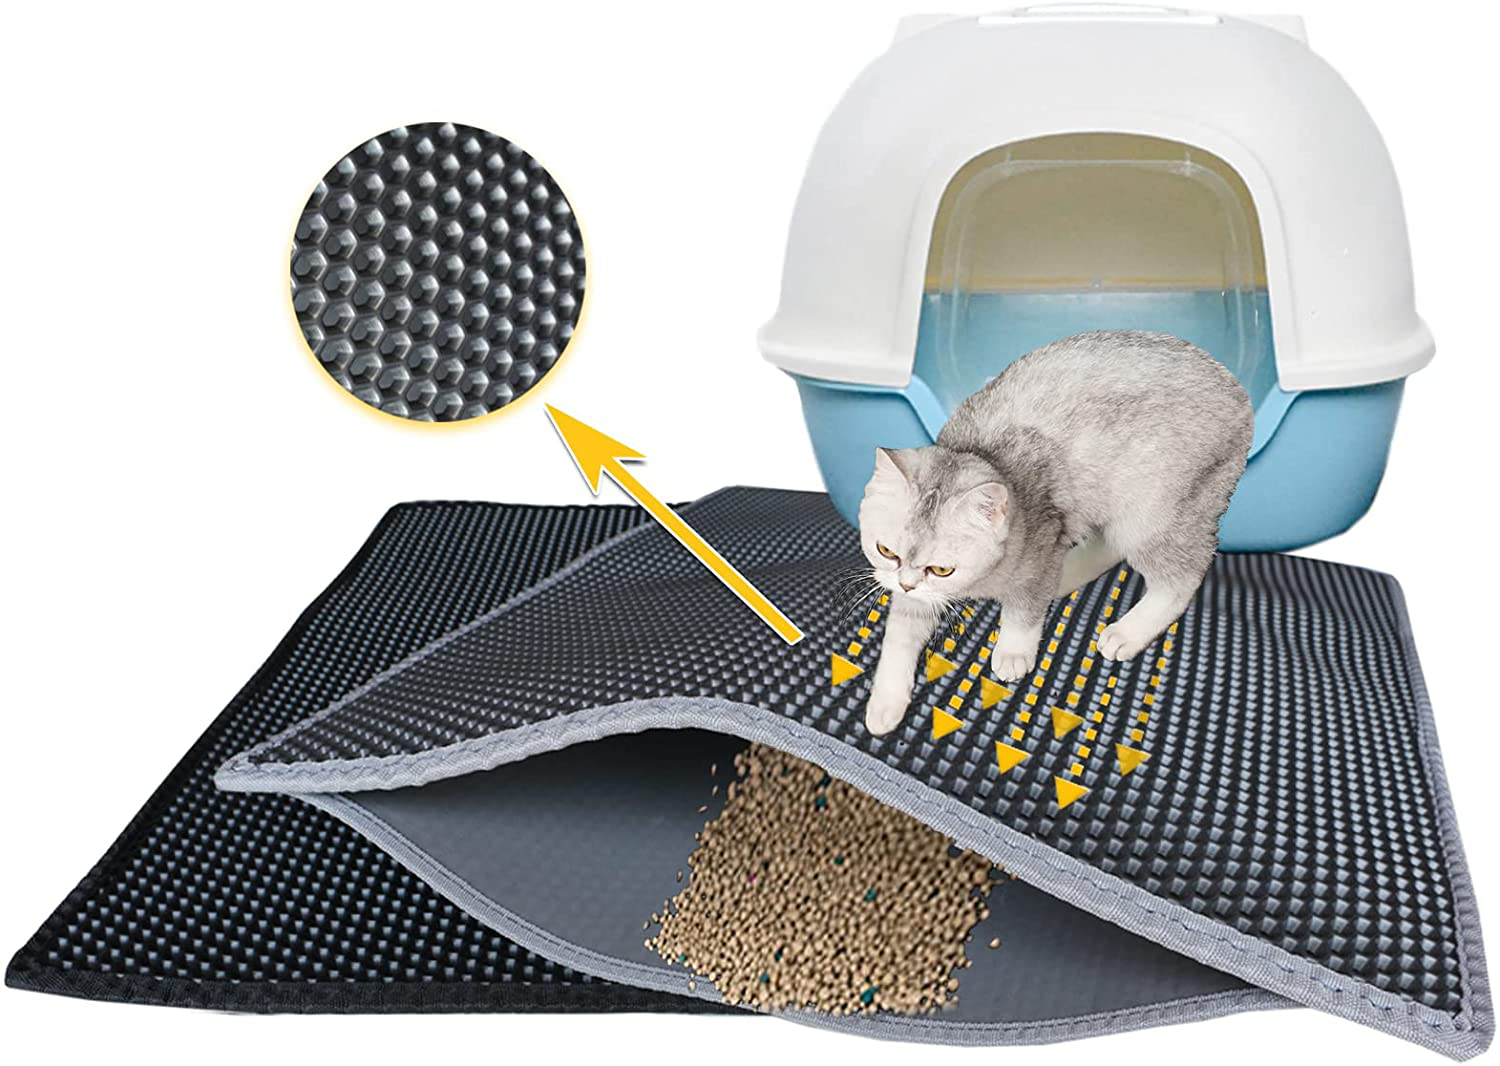 Pemony Cat Litter Mat Double Layer Design, Cat Litter Mat Large XL ,Waterproof Urine Proof Material, Easy Clean Washable Scatter Control, Easy to Release Litter (23.5X29.5 Inch (Pack of 1), Gray)